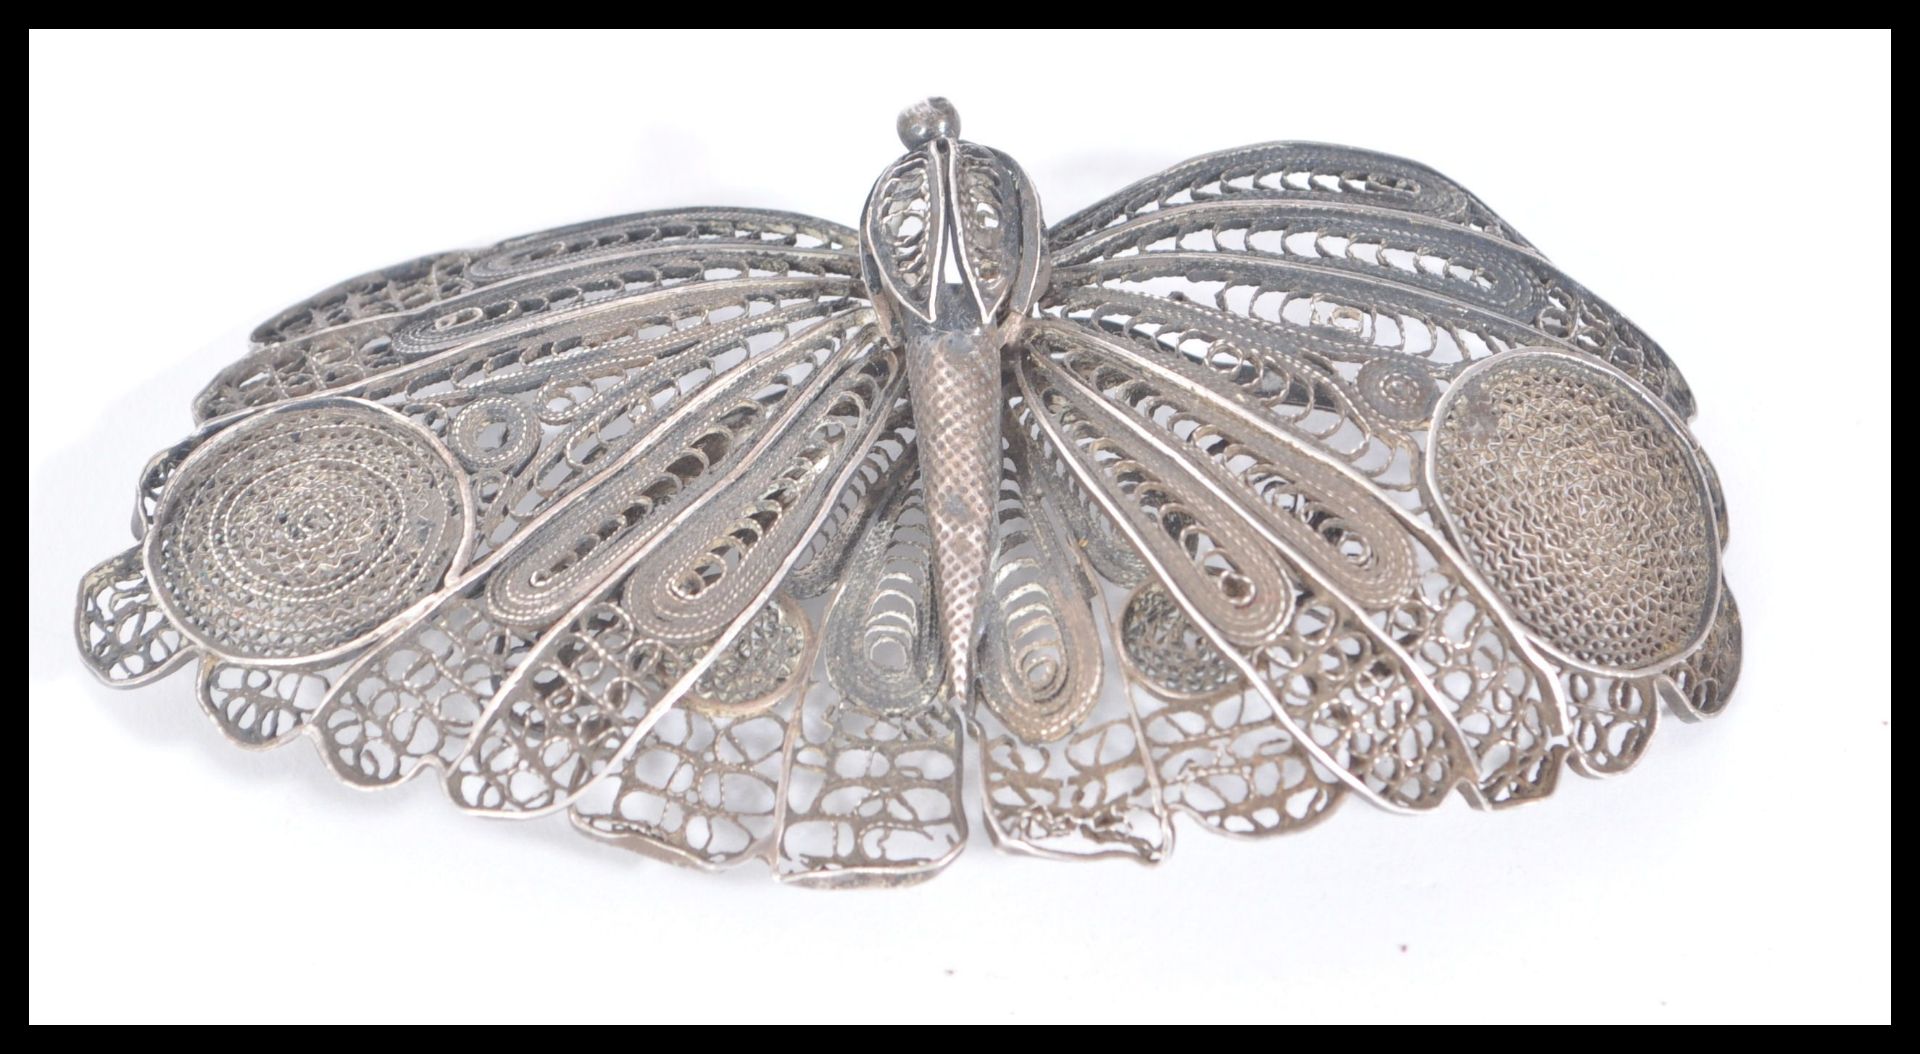 A large antique silver filigree brooch in the form of a butterfly along with a silver brooch - Image 2 of 4